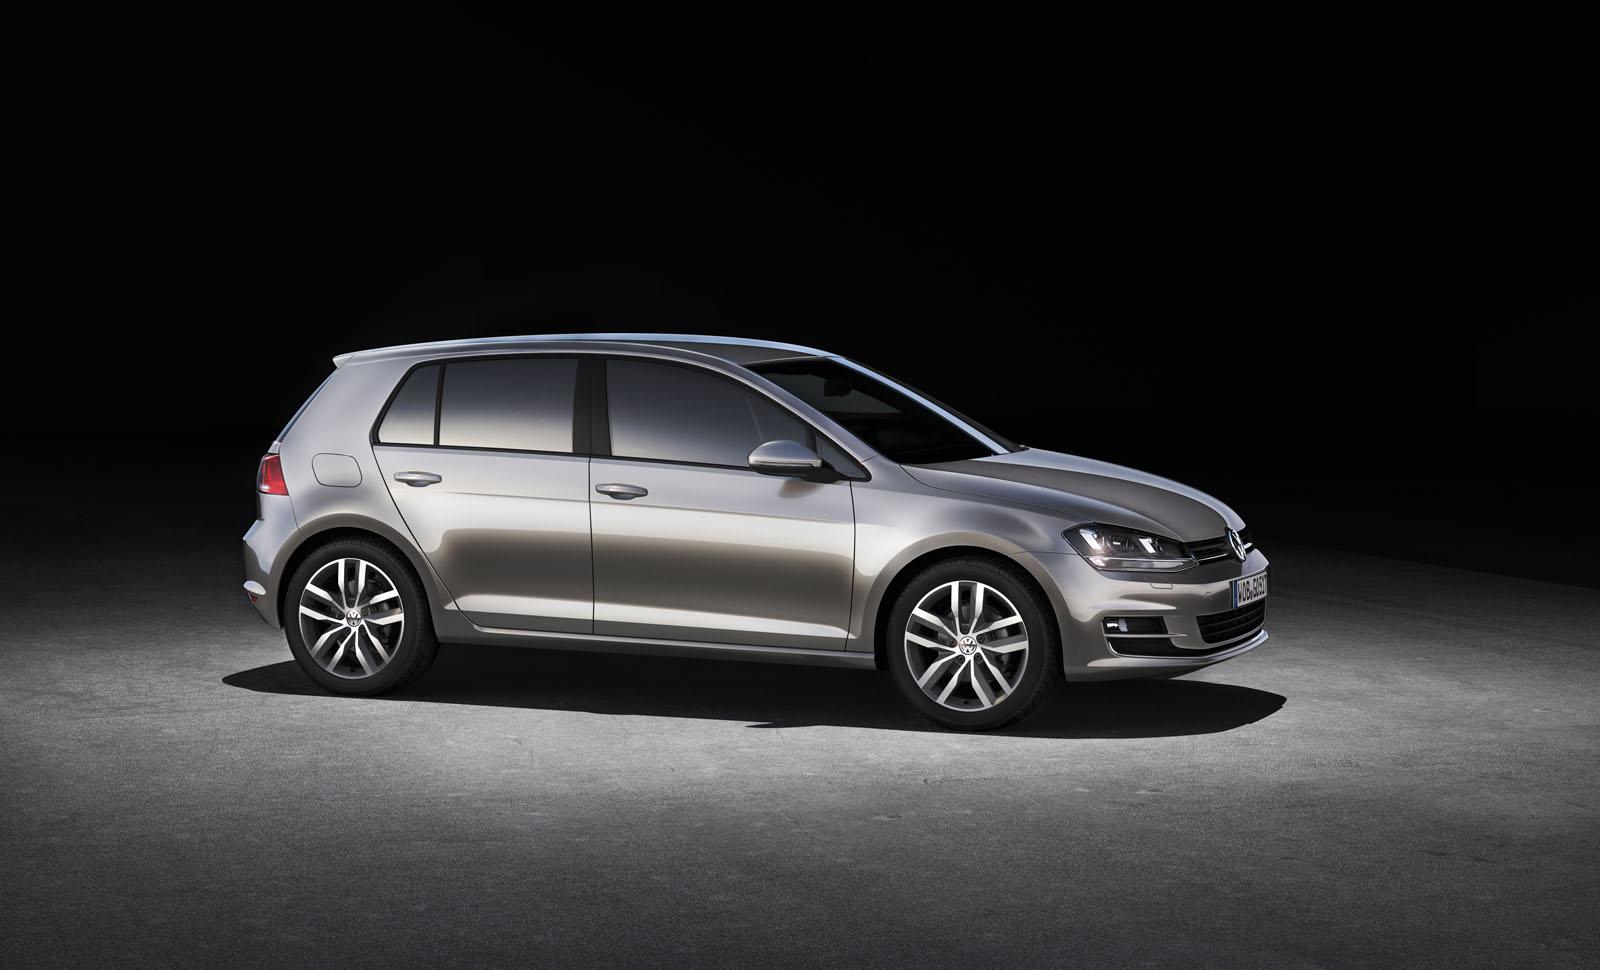 https://s1.cdn.autoevolution.com/images/news/volkswagen-golf-vii-official-specs-and-images-released-photo-gallery-49074_1.jpg